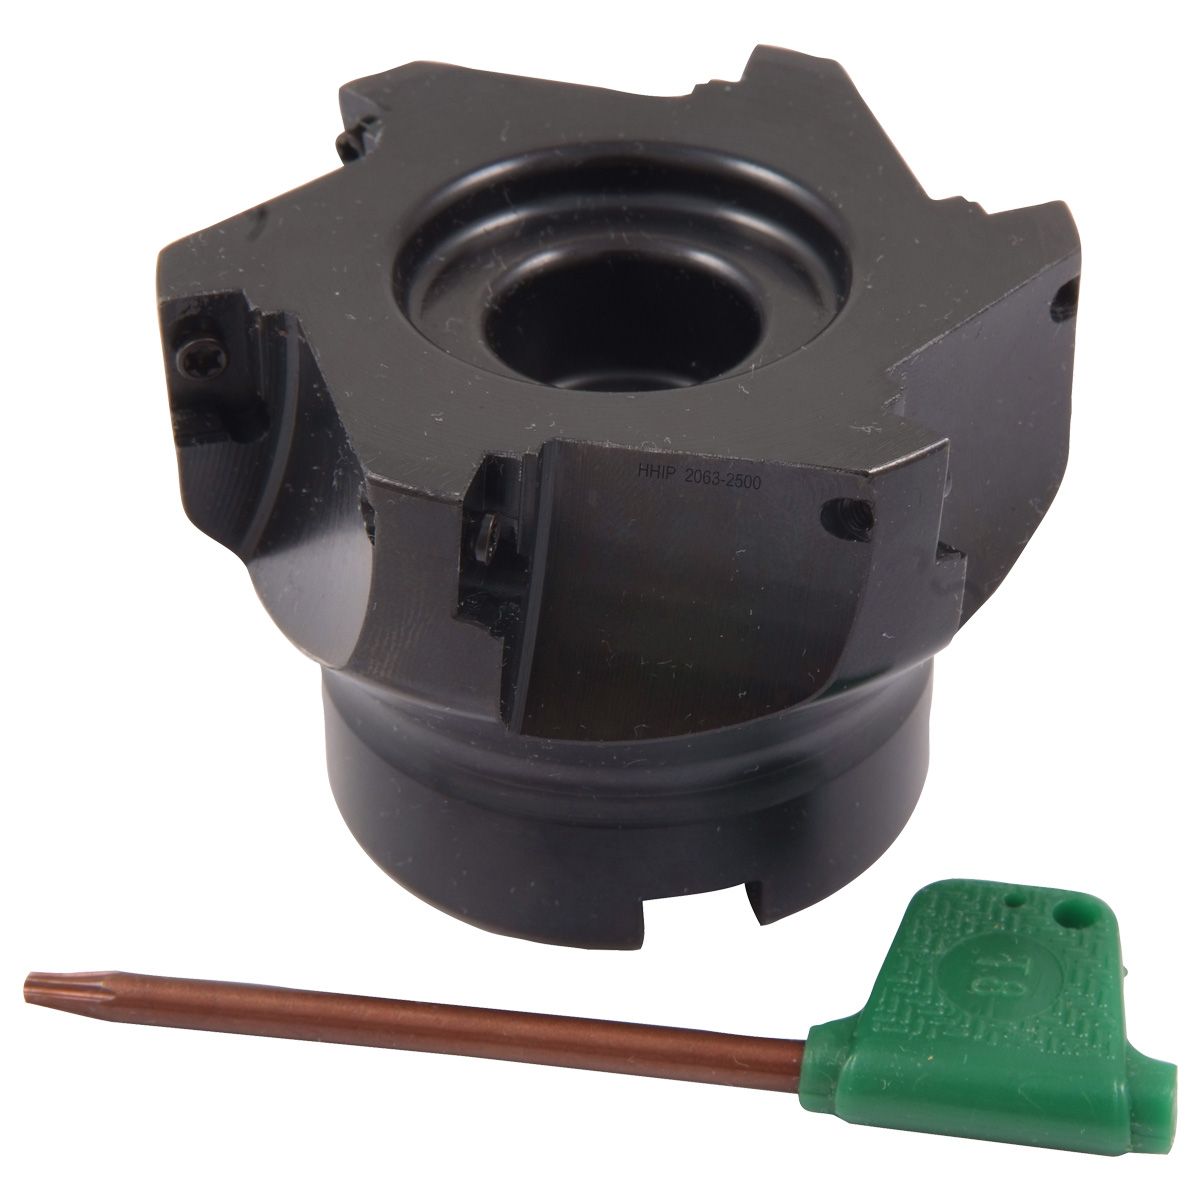 2-1/2" X 3/4 BORE 90 DEGREE APKT INDEXABLE FACE MILL (2063-2500)